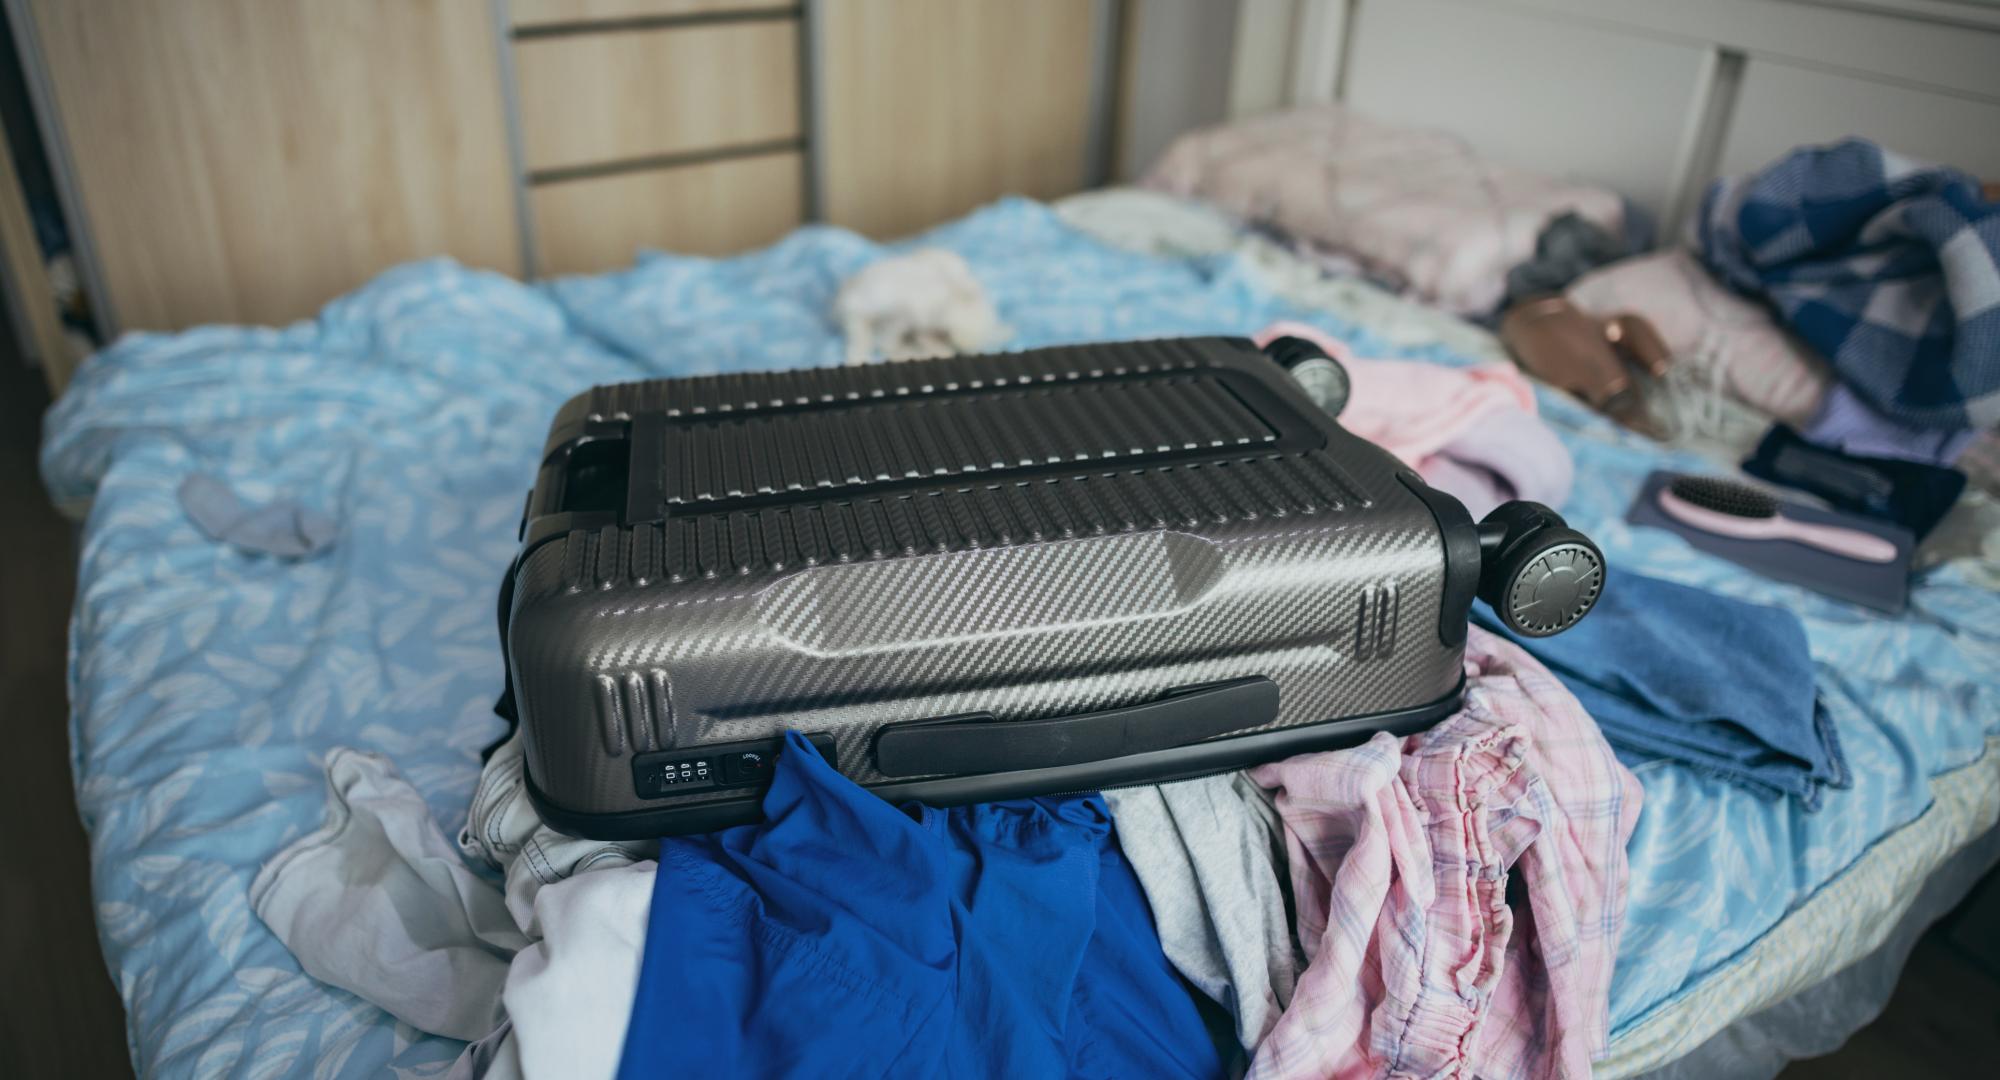 Suitcase on a bed of a temporary accomodation